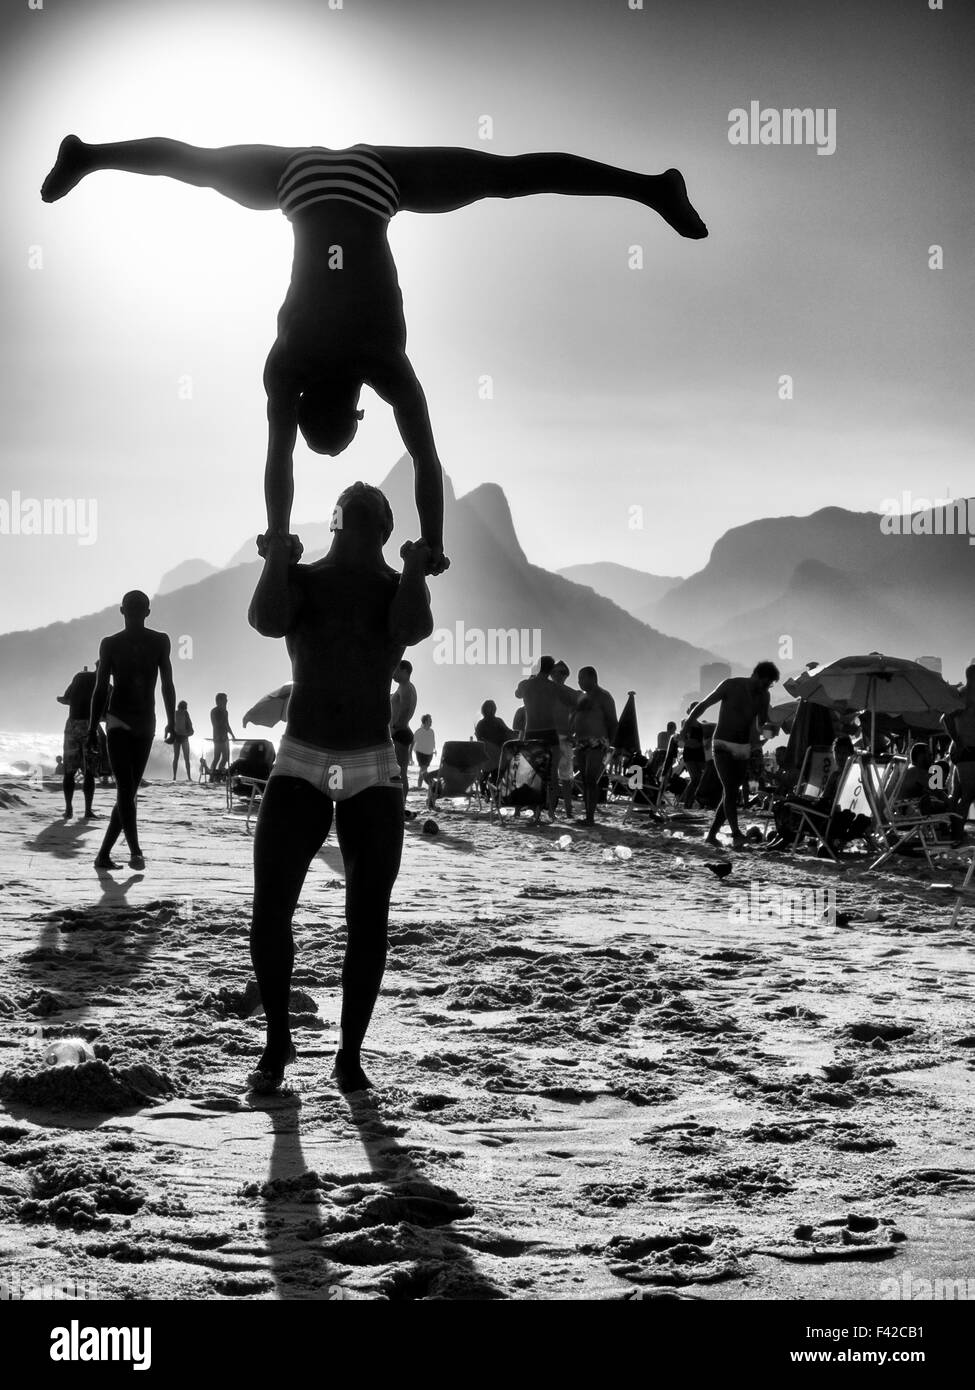 Silhouettes making acrobatic poses in front of a black and white sunset beach scene at Ipanema Beach Rio de Janeiro Brazil Stock Photo